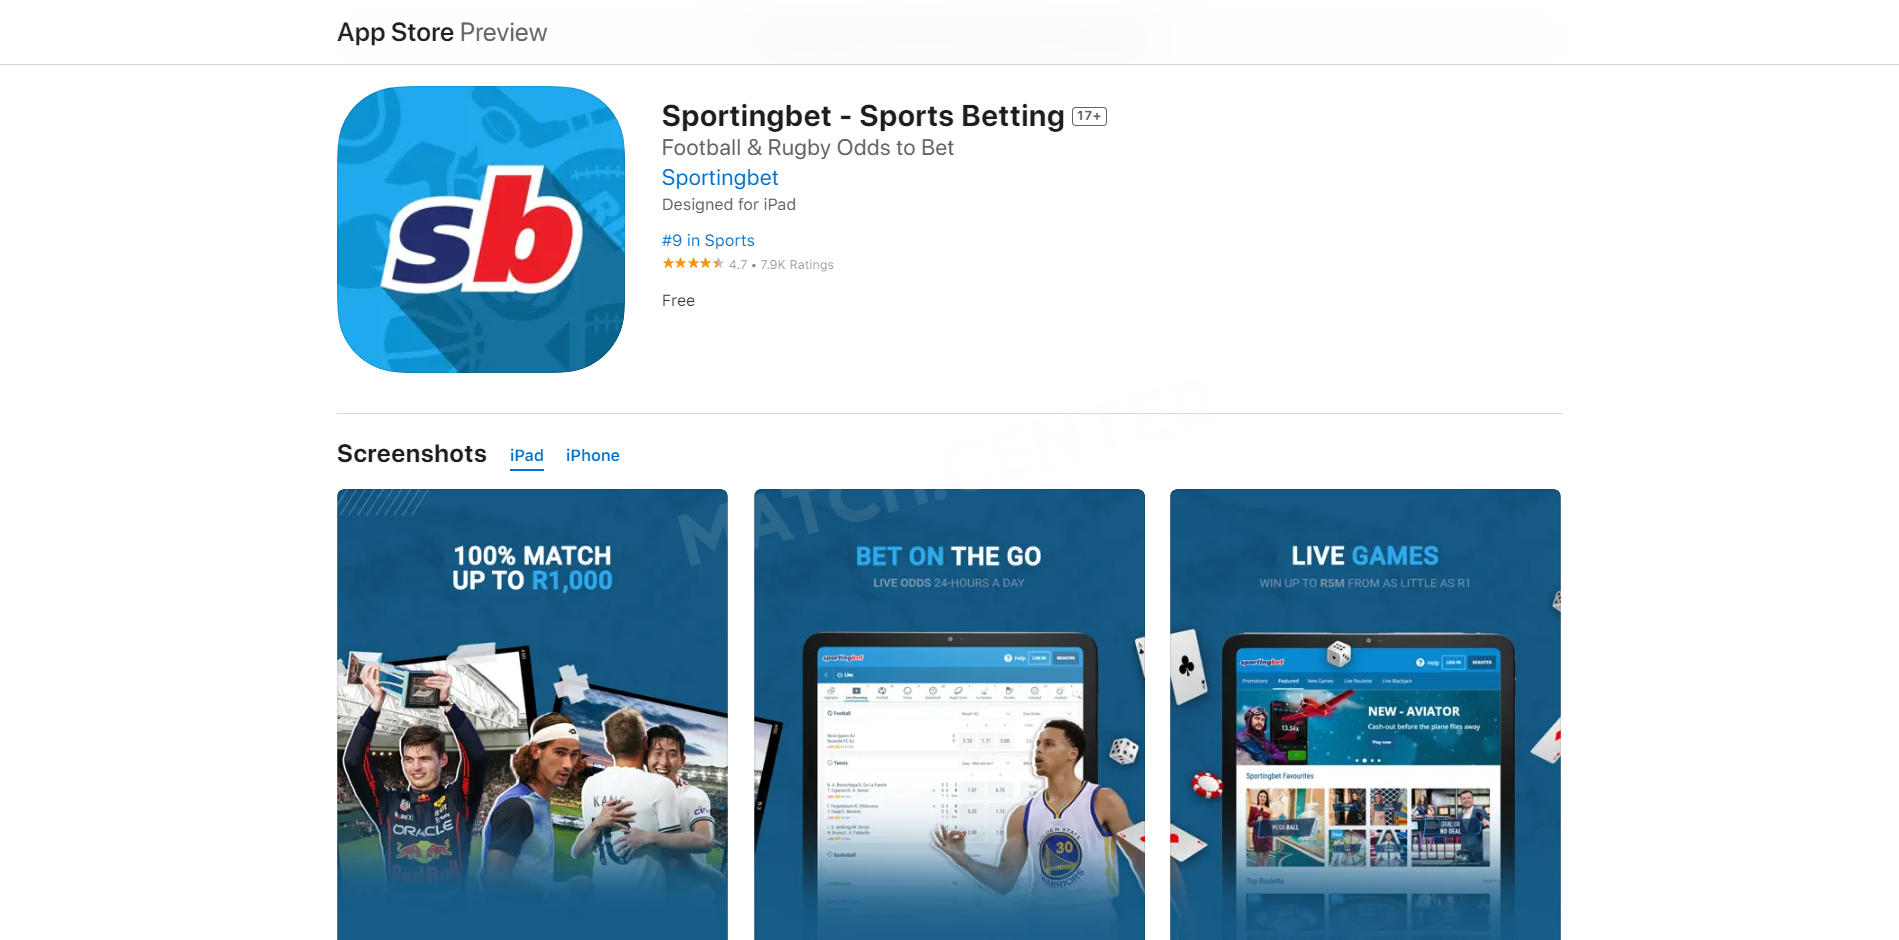 Sportingbet app page at the Apple app store